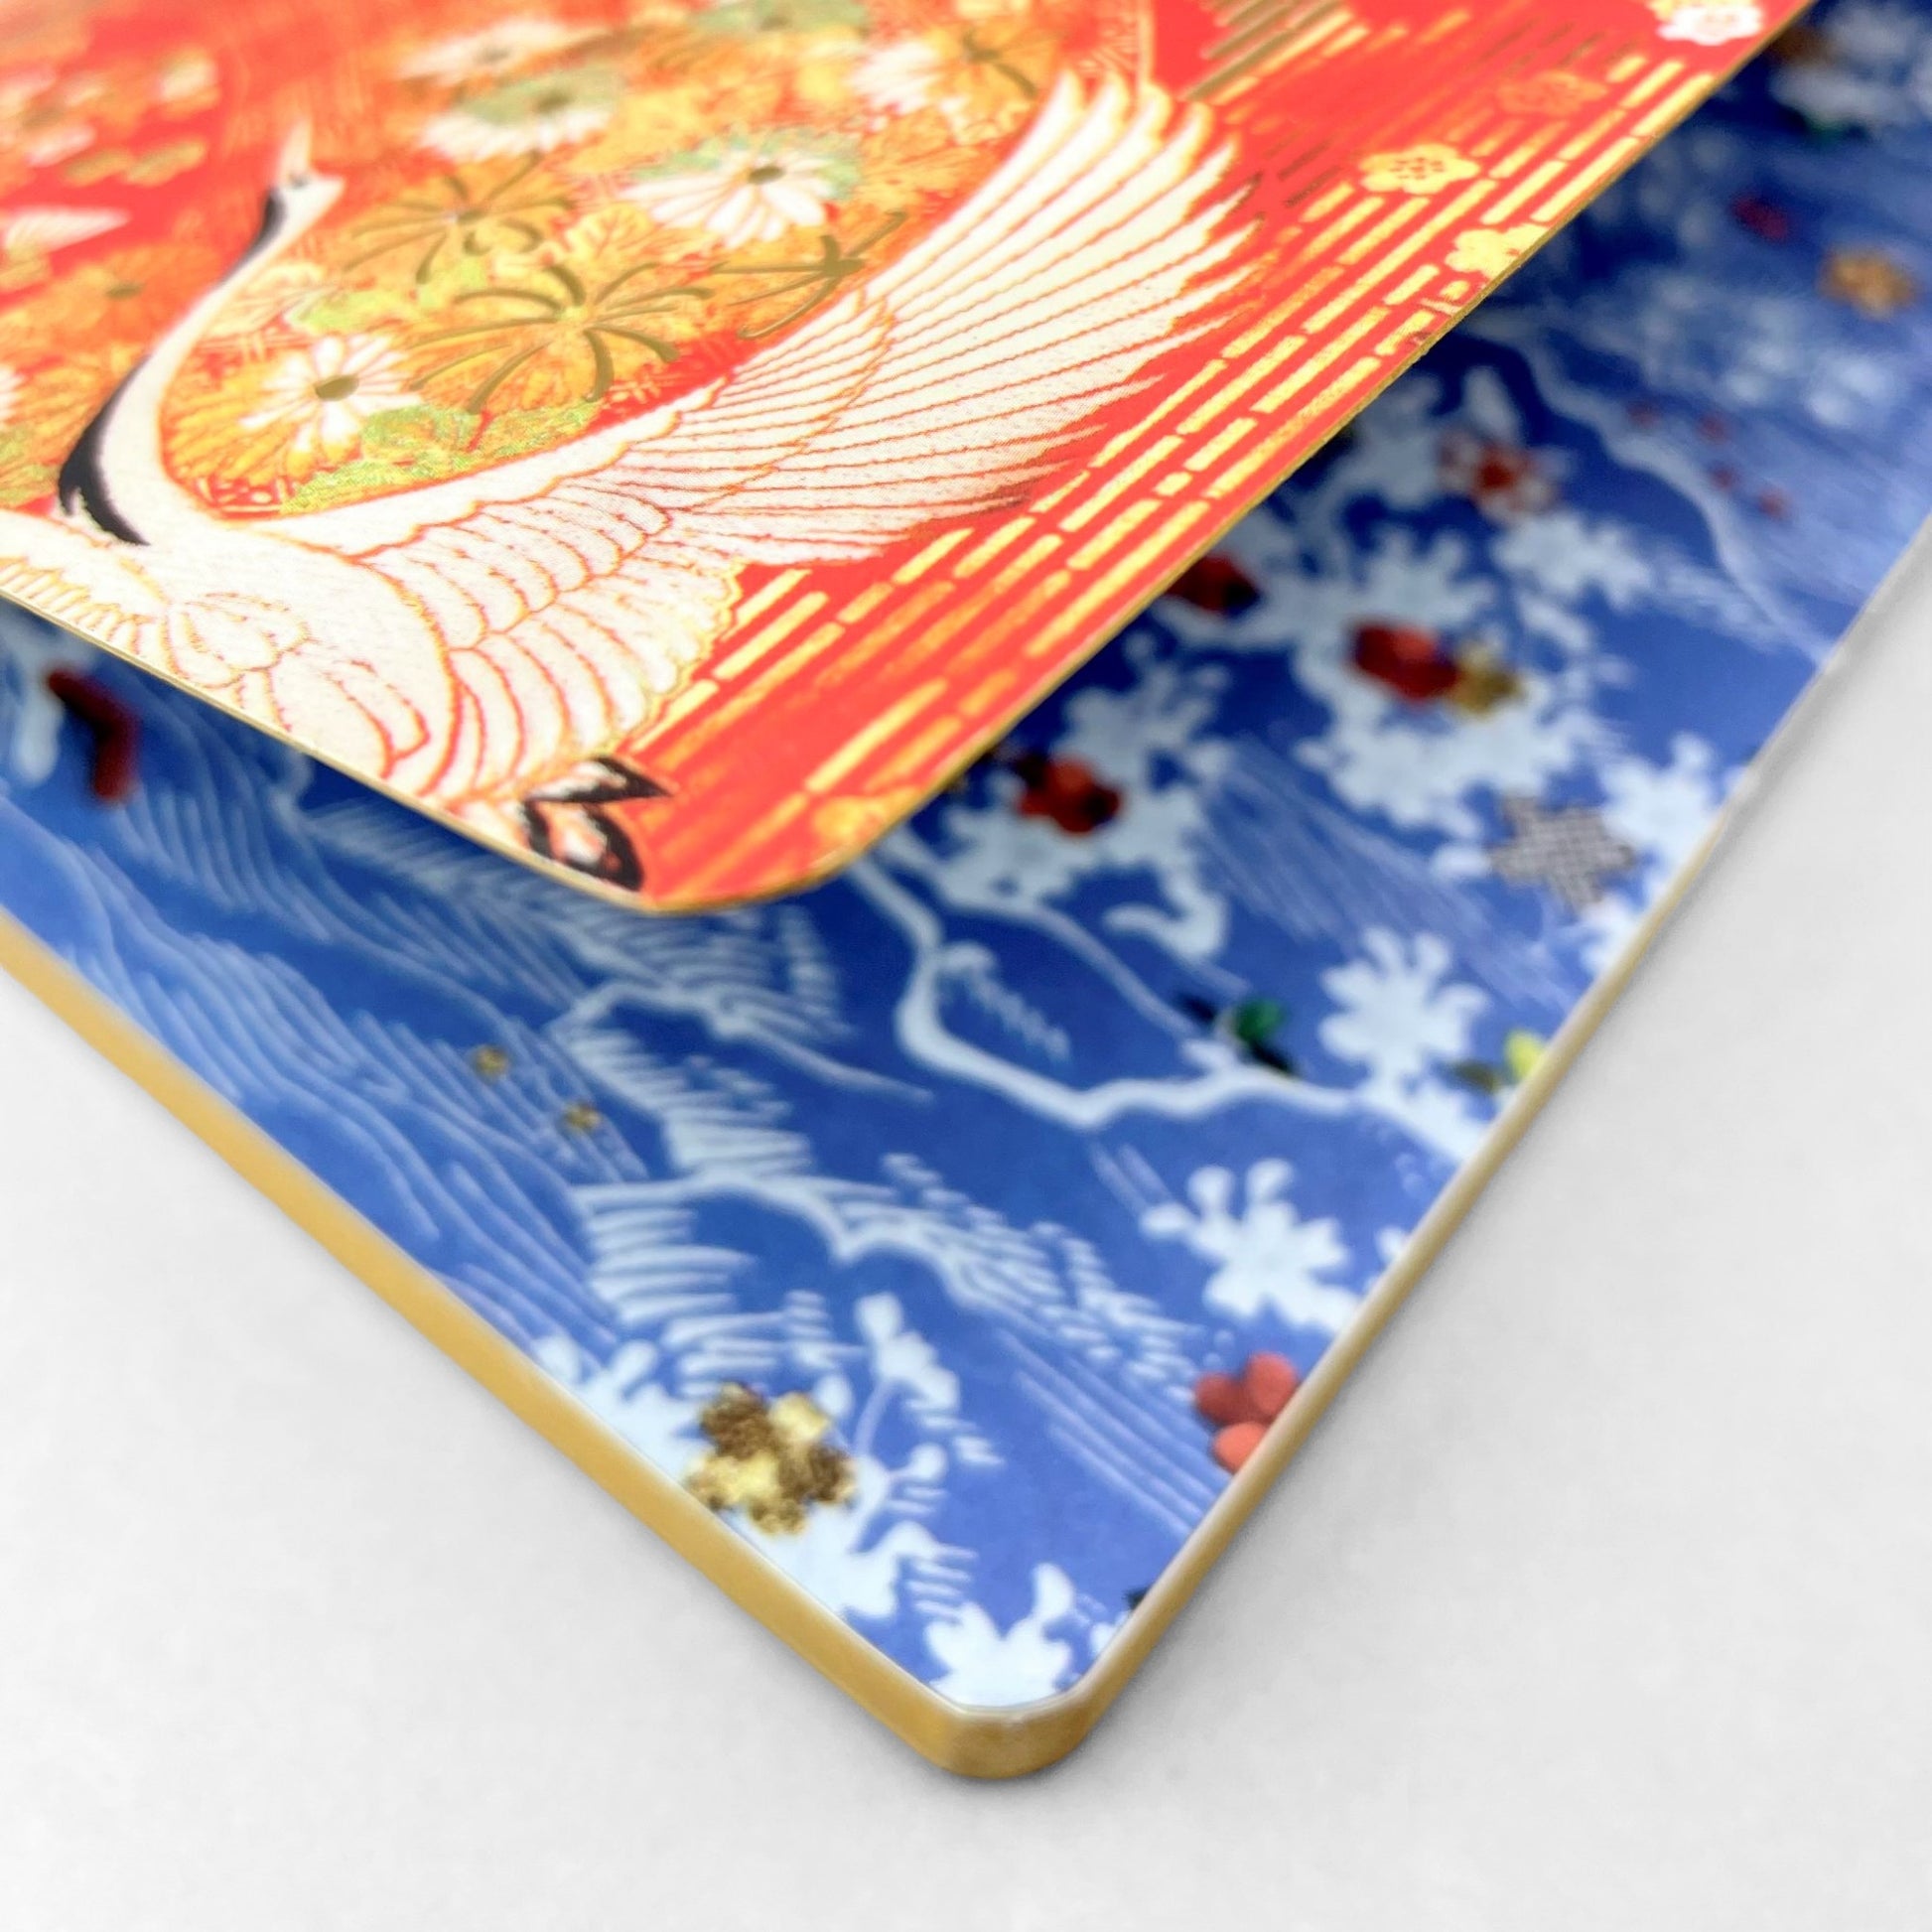 A5 lined notebook with a japanese cover design with white swans on an orange background